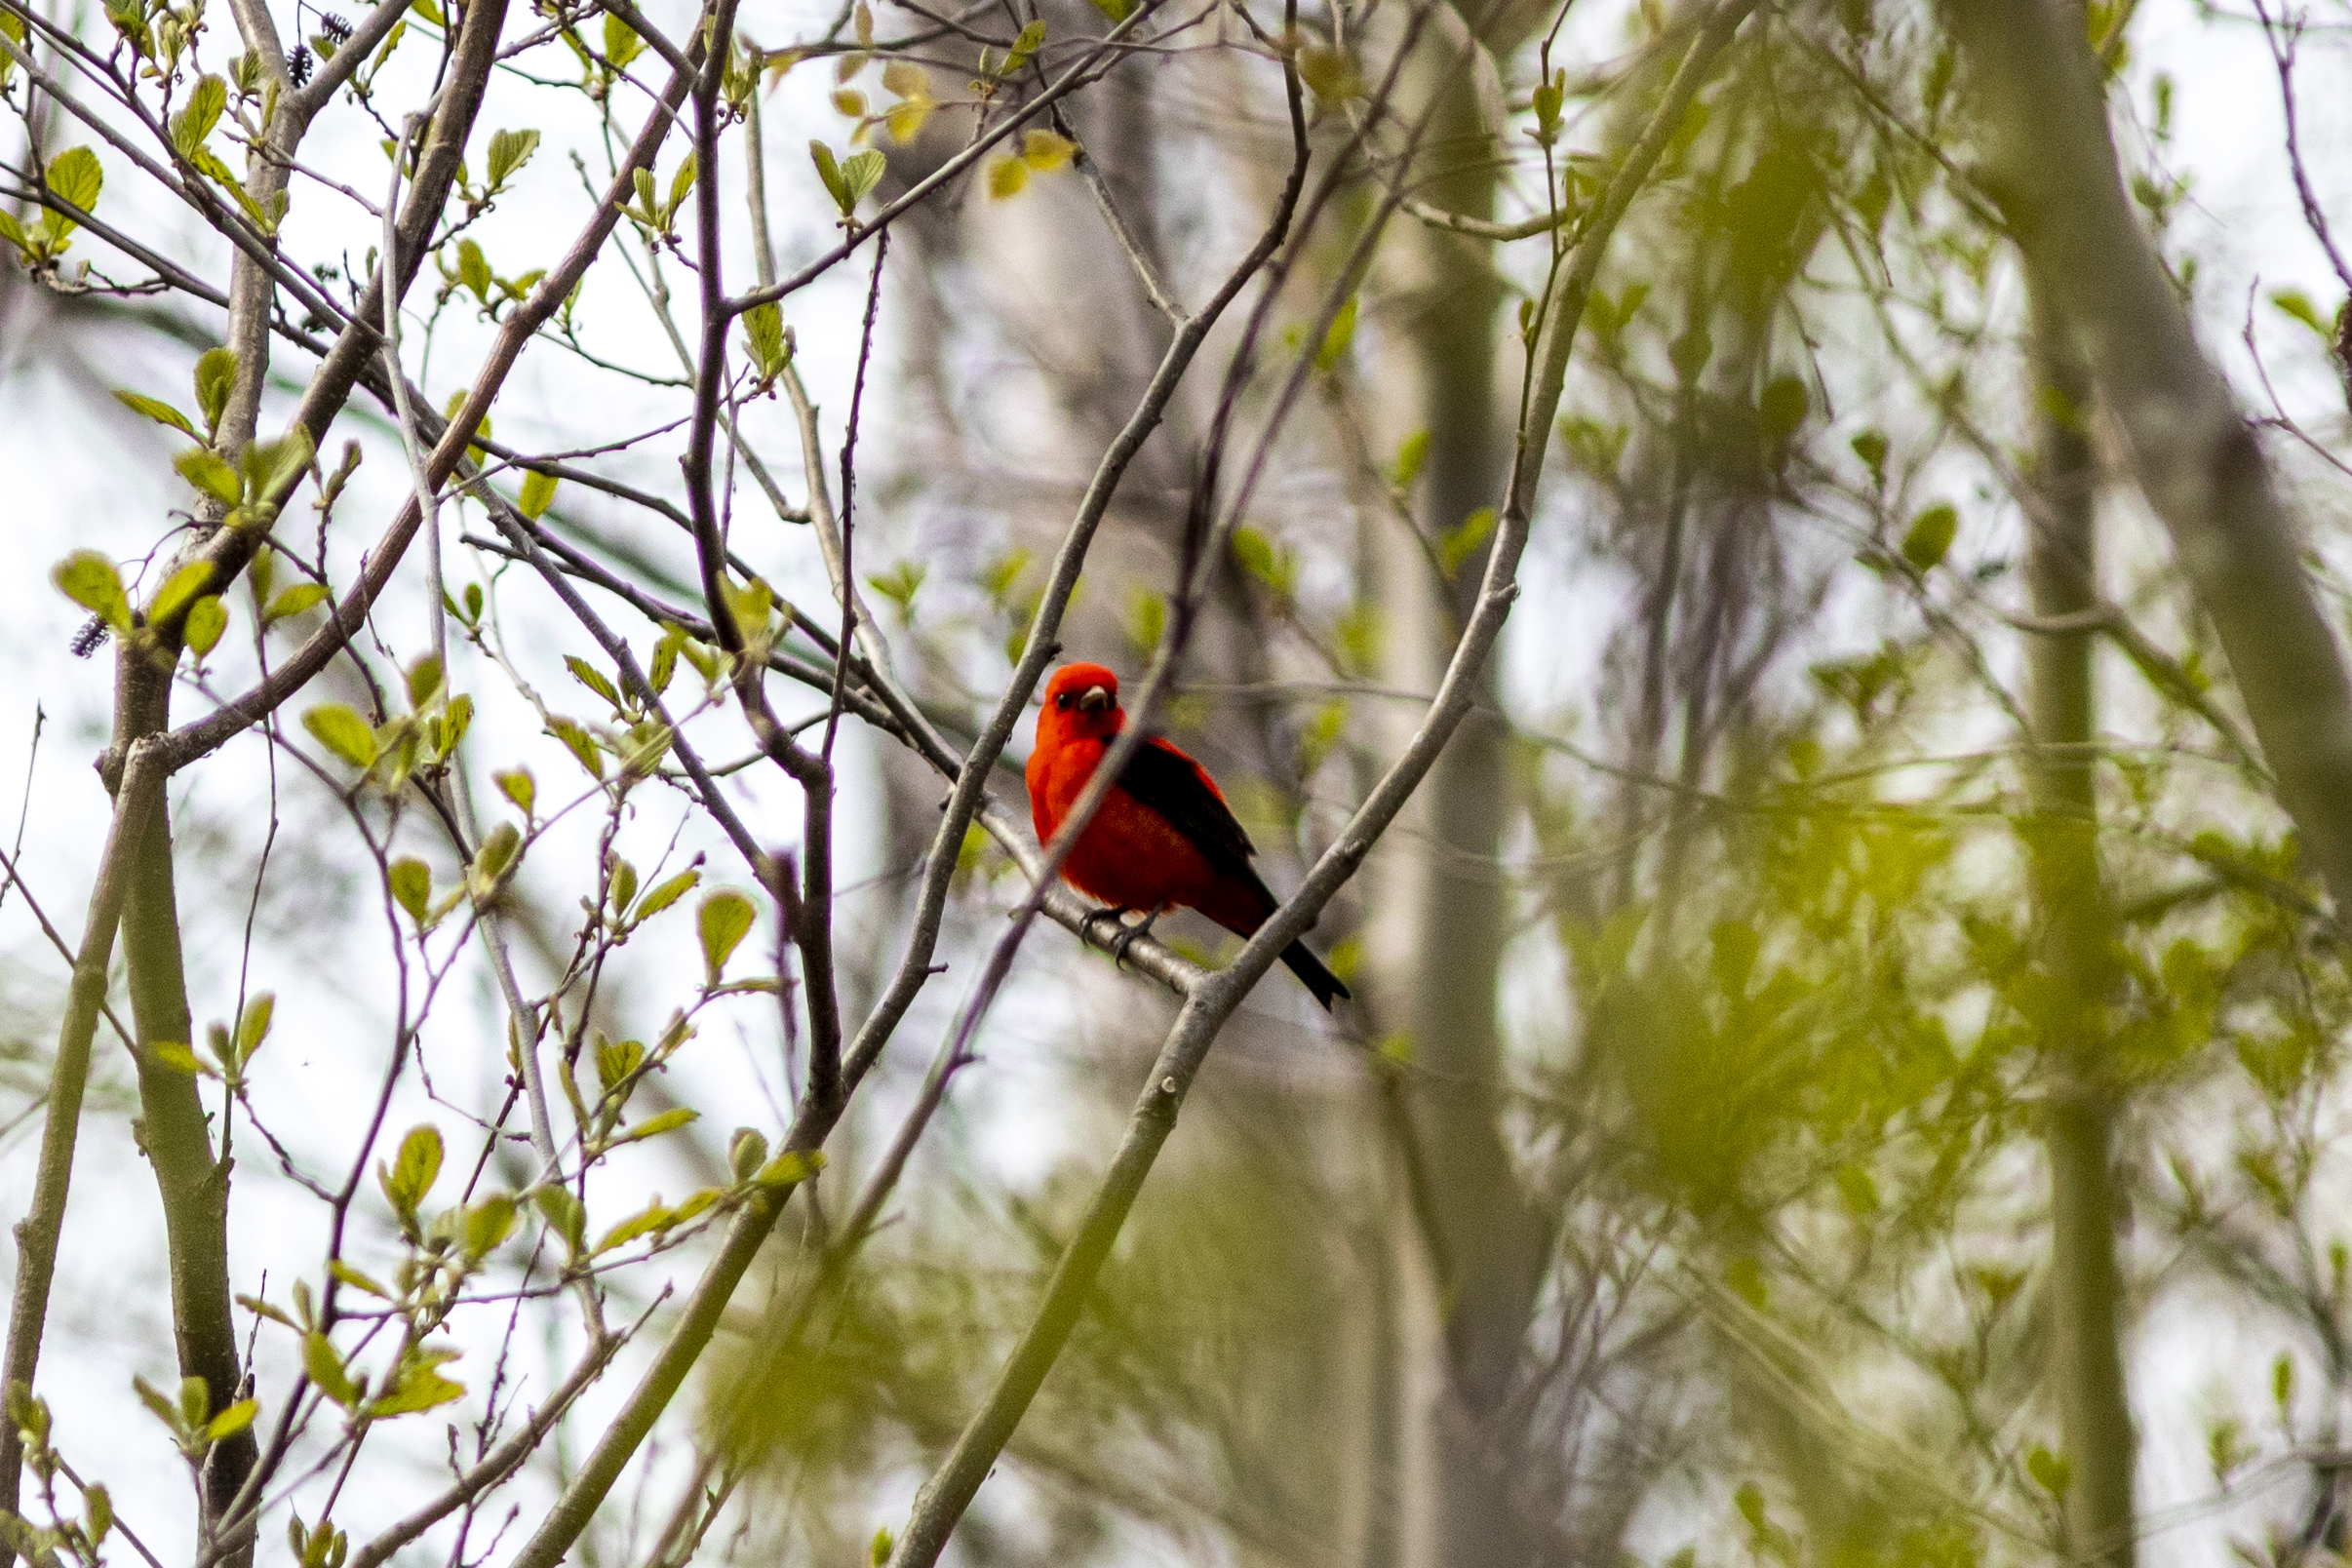 A bright red bird with black wings looks at the camera, perched on a branch with new leaves growing in at  Tommy Thompson Park.